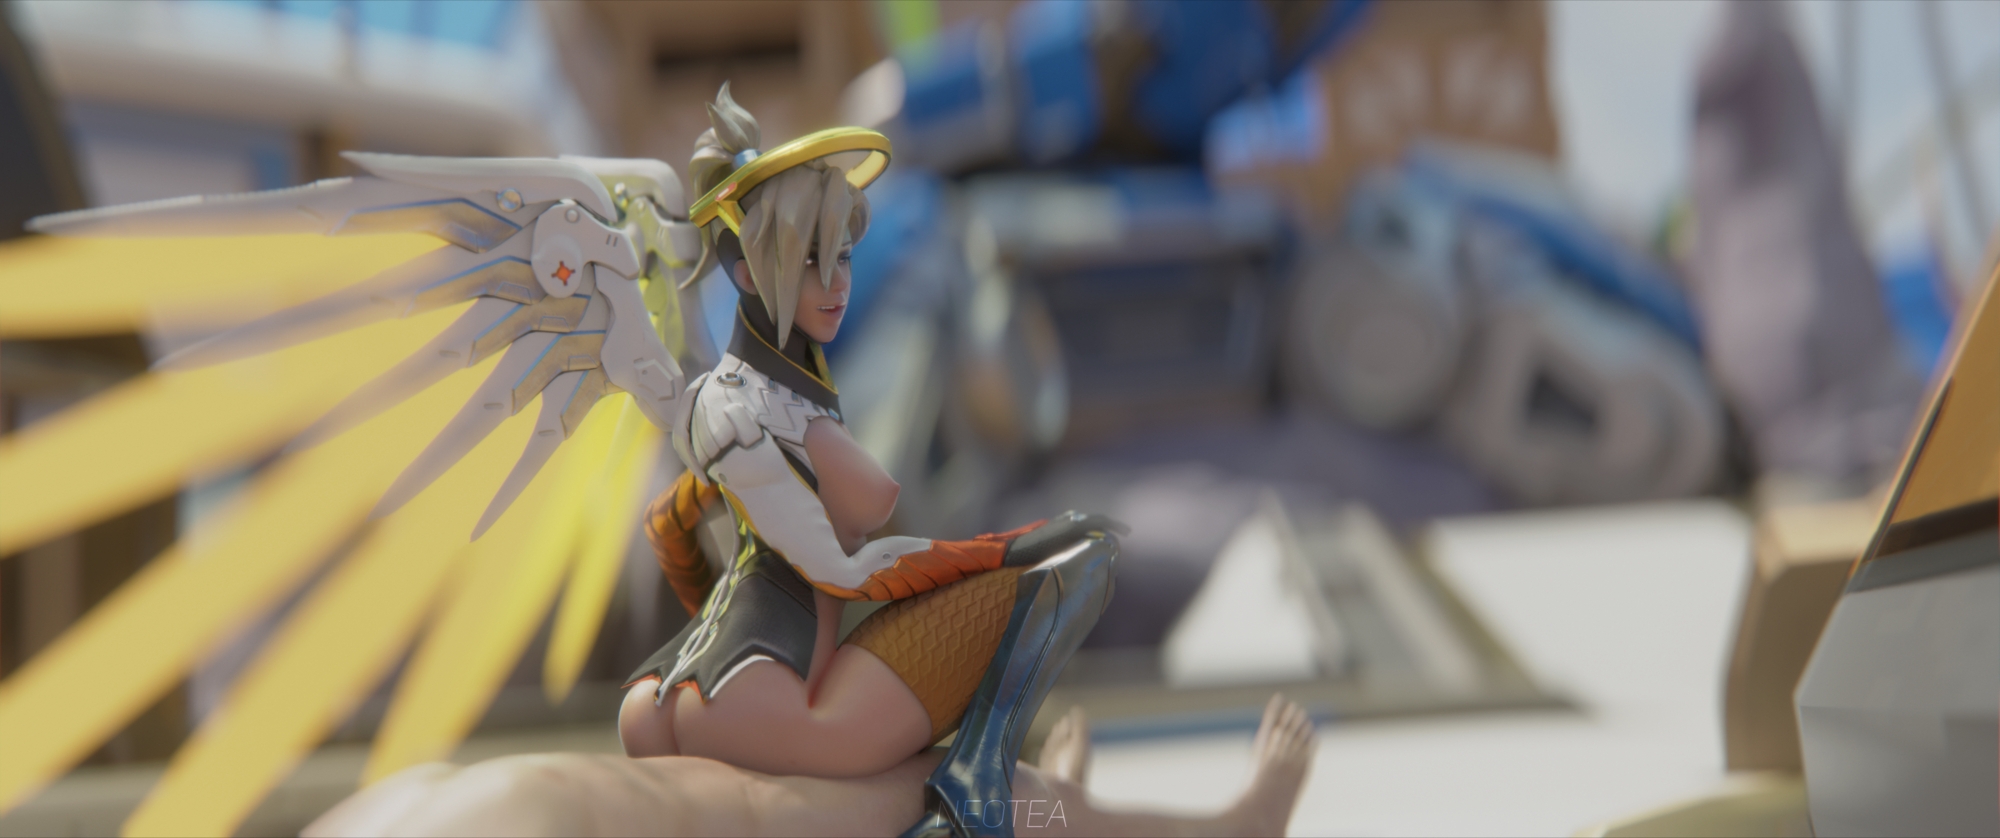 Mercy Has a Nice Disappearing Act to show you Mercy Overwatch Big Ass Big Dick Sex Cowgirl Position Milf 2